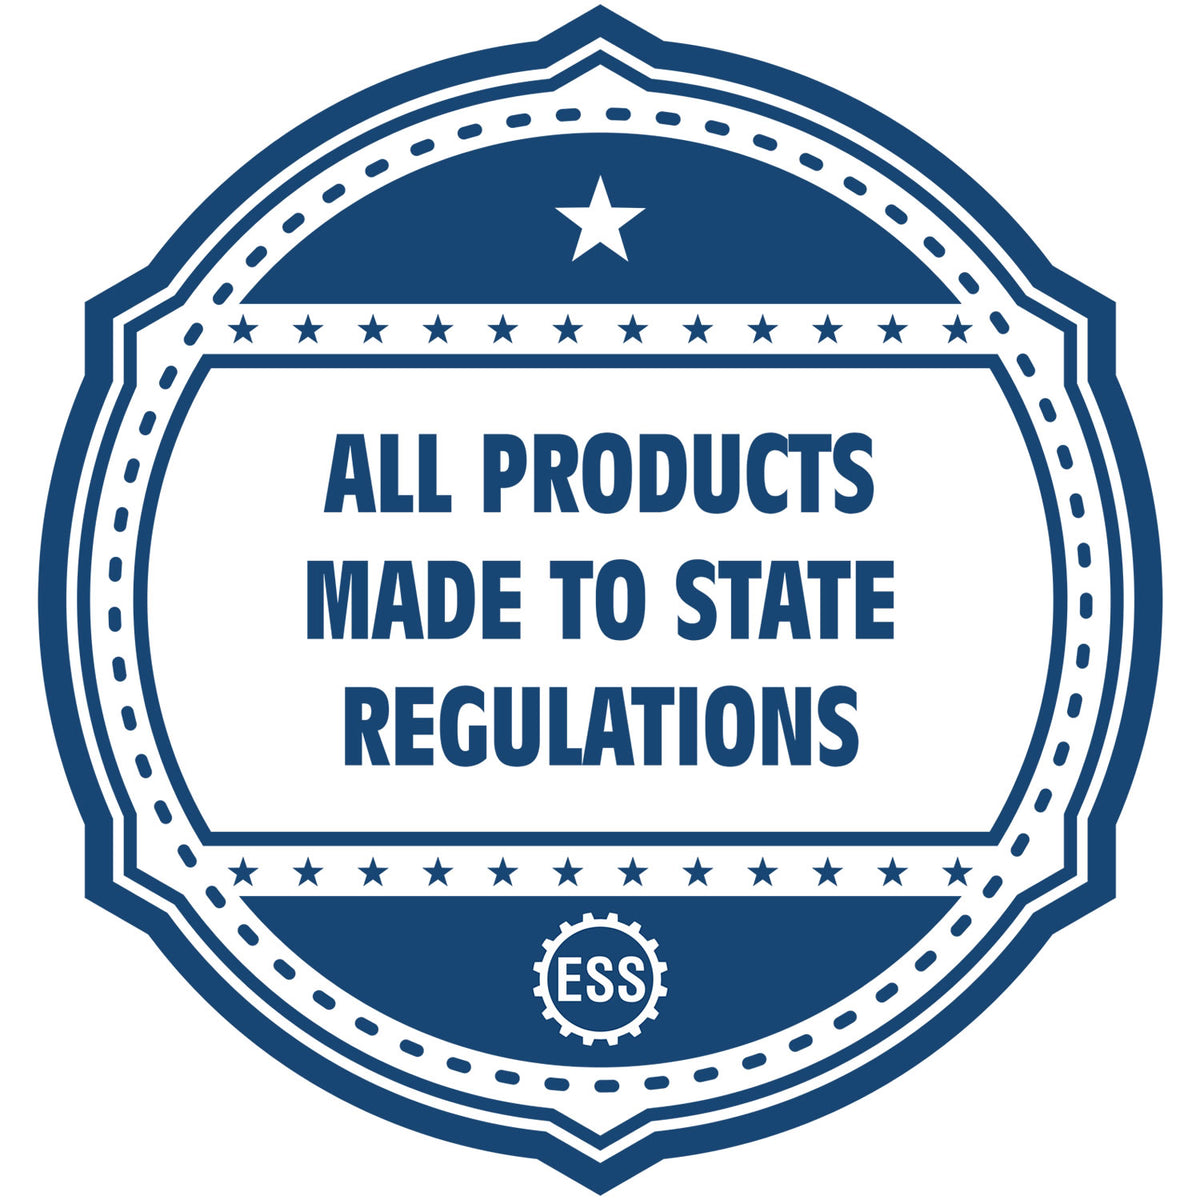 An icon or badge element for the Wooden Handle Connecticut State Seal Notary Public Stamp showing that this product is made in compliance with state regulations.